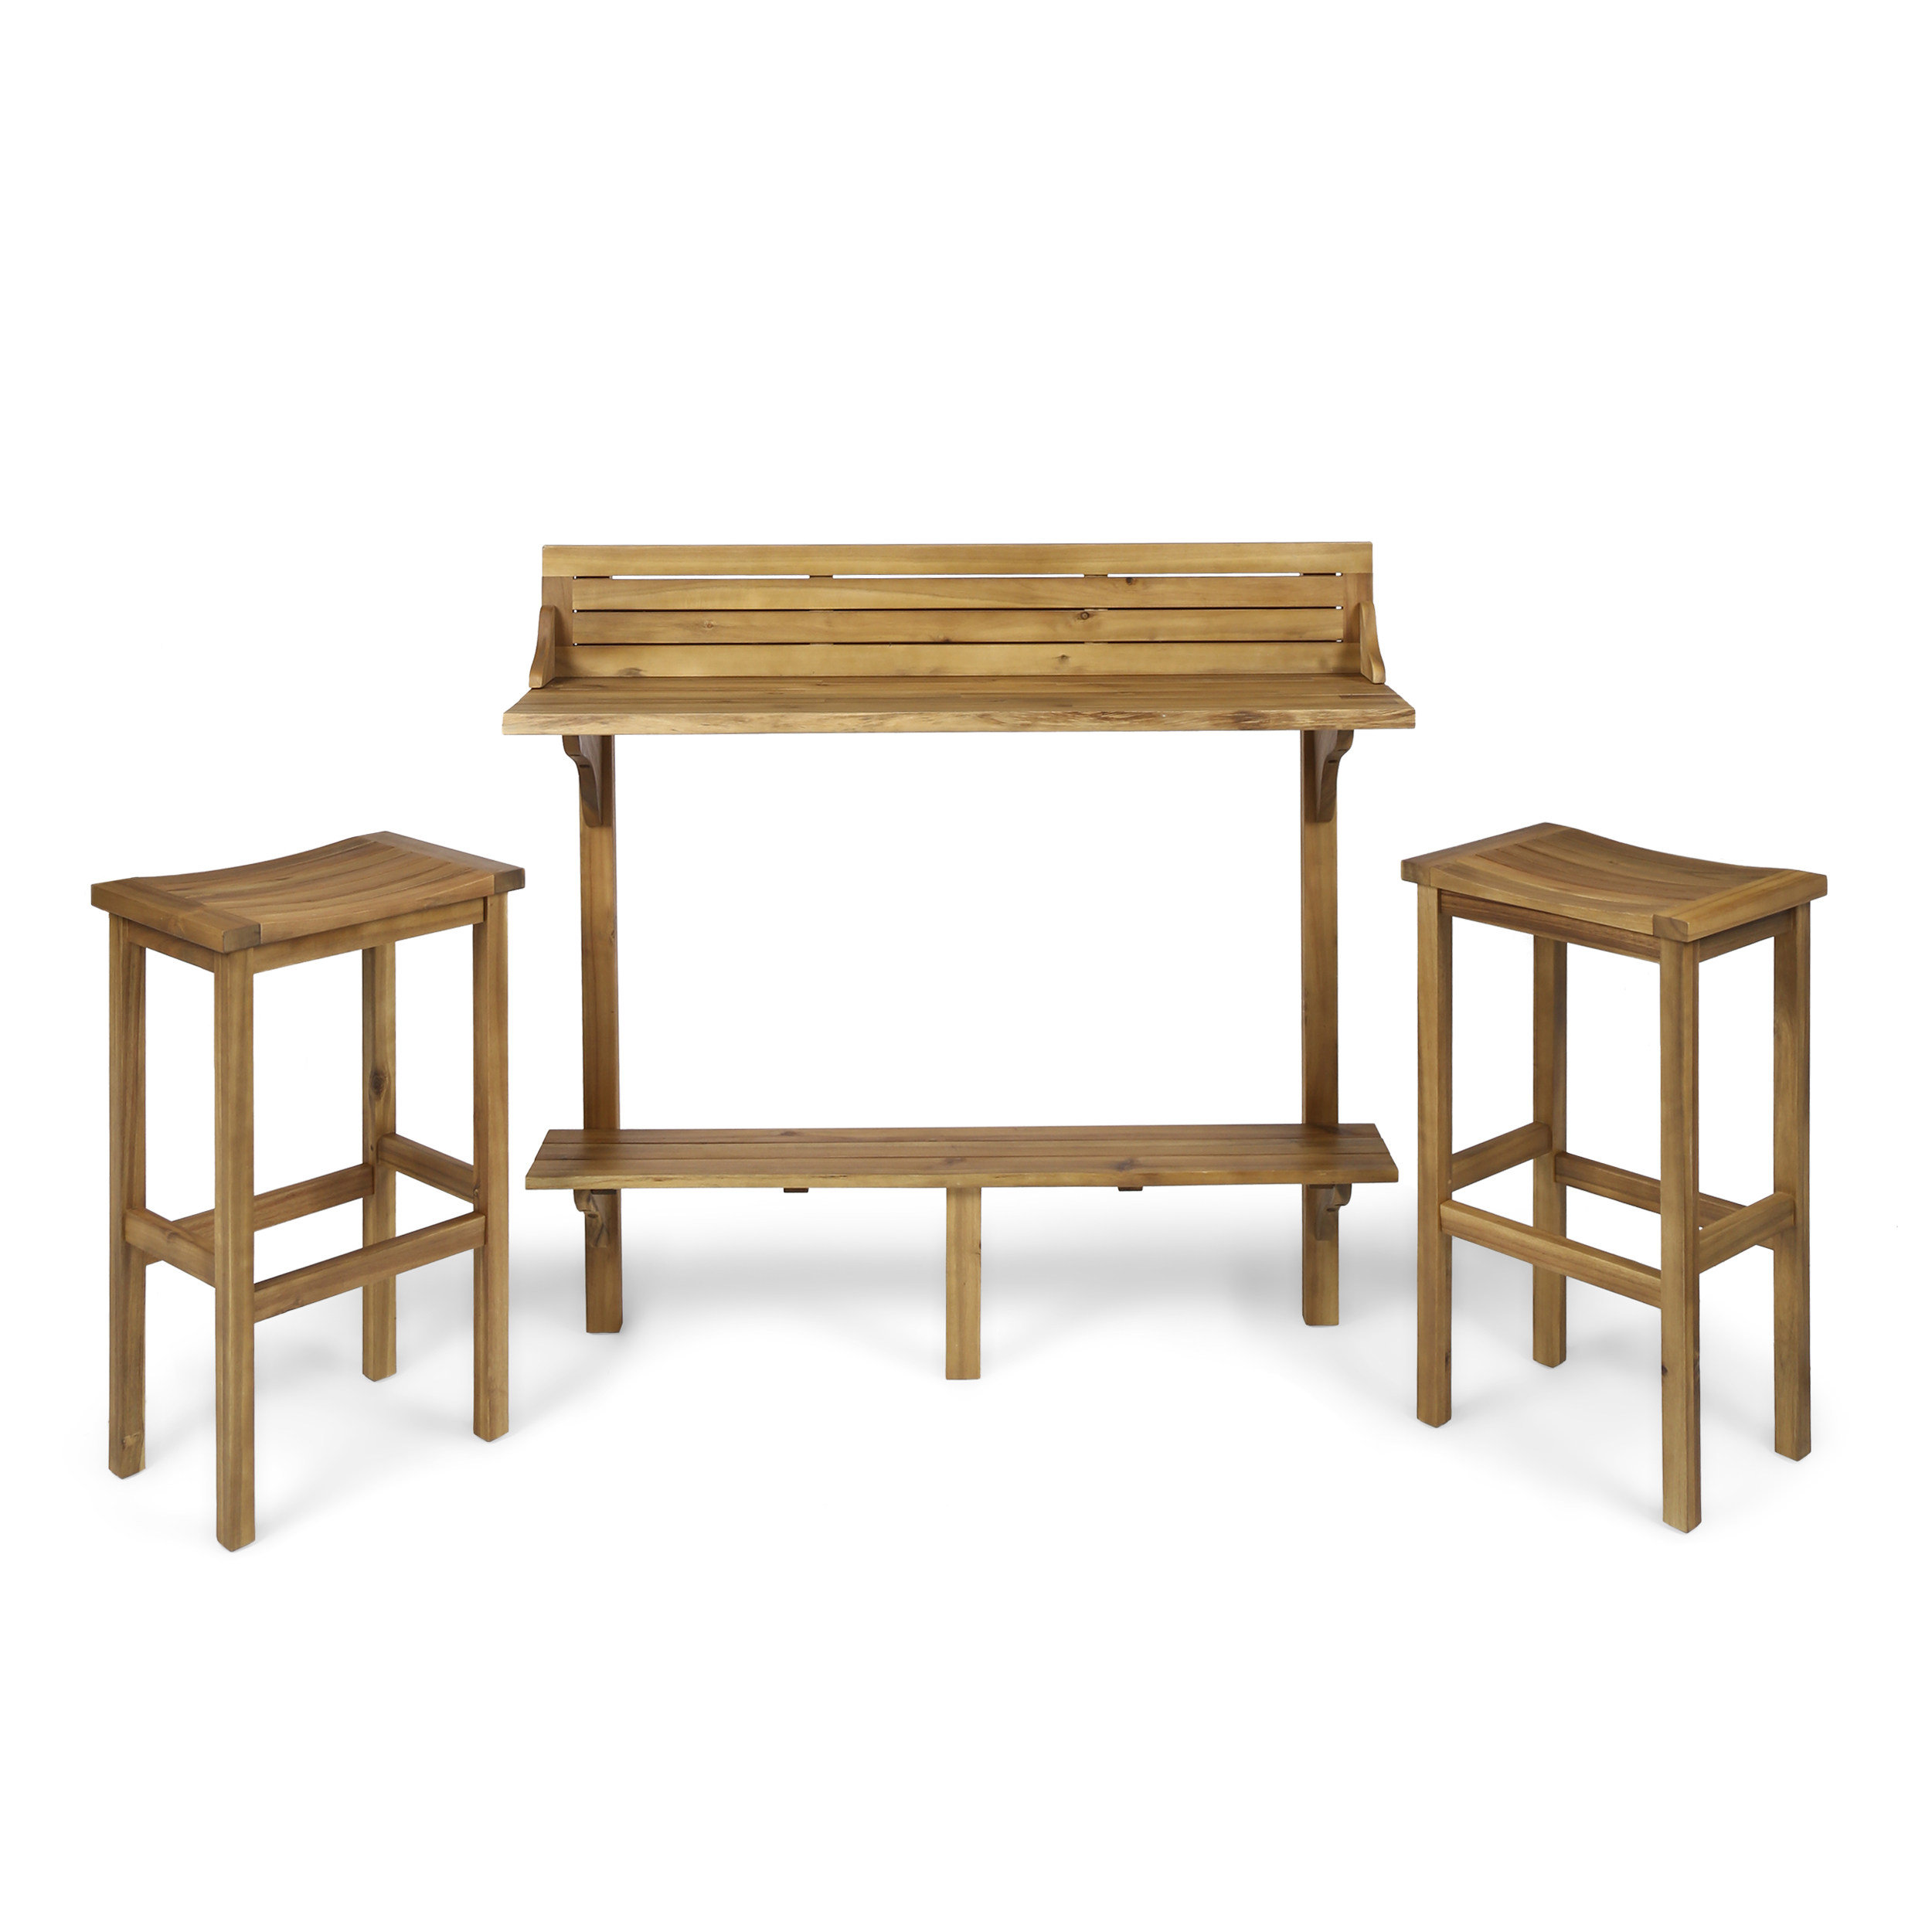 Cassie Outdoor 3 Piece Acacia Wood Balcony Bar Set - Natural Stained